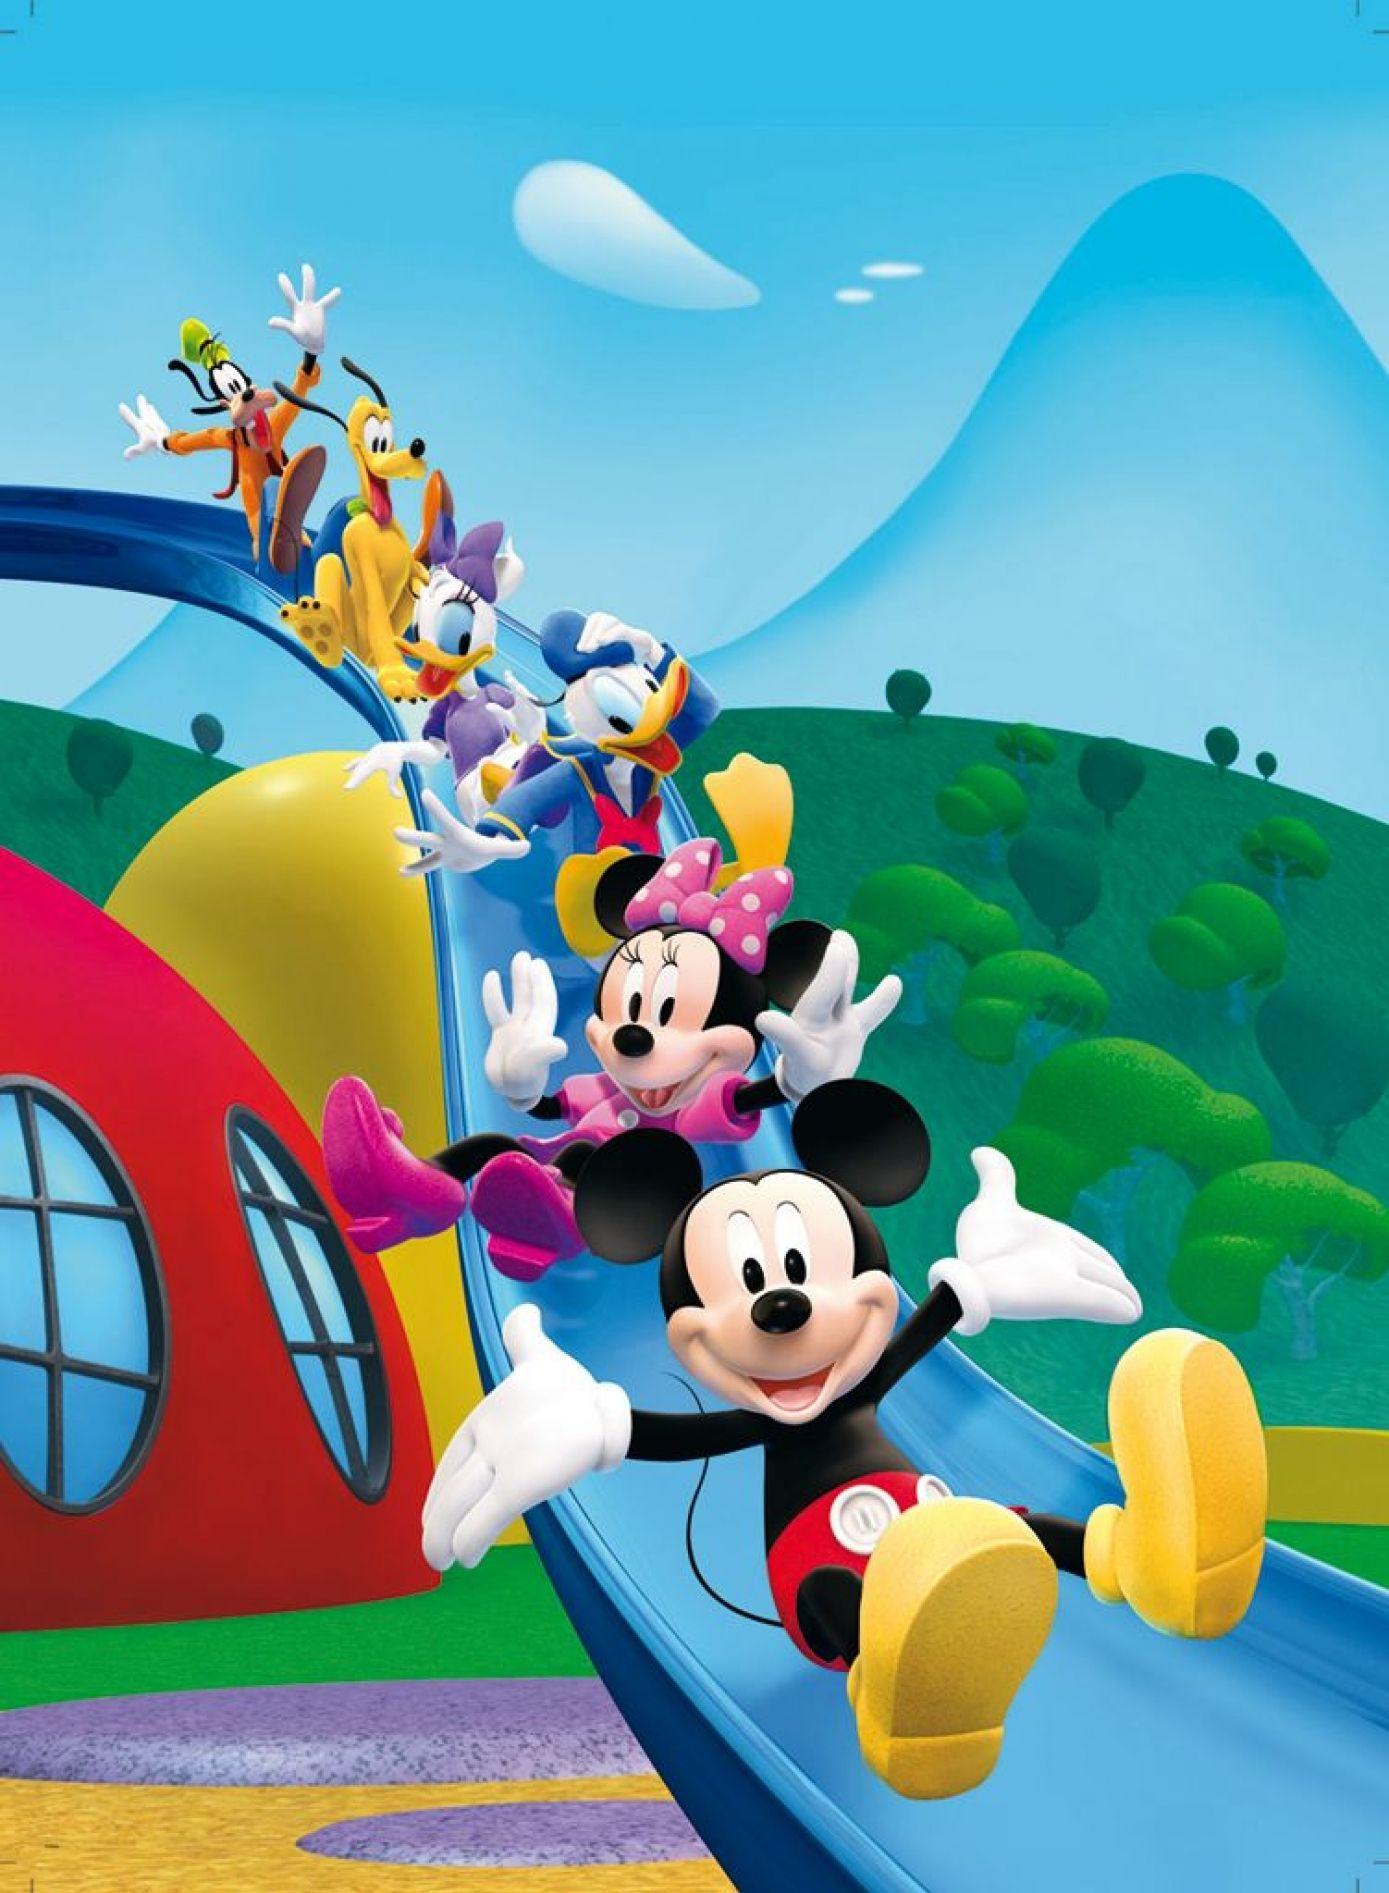 Mickey Mouse Clubhouse Wallpapers - Wallpaper Cave